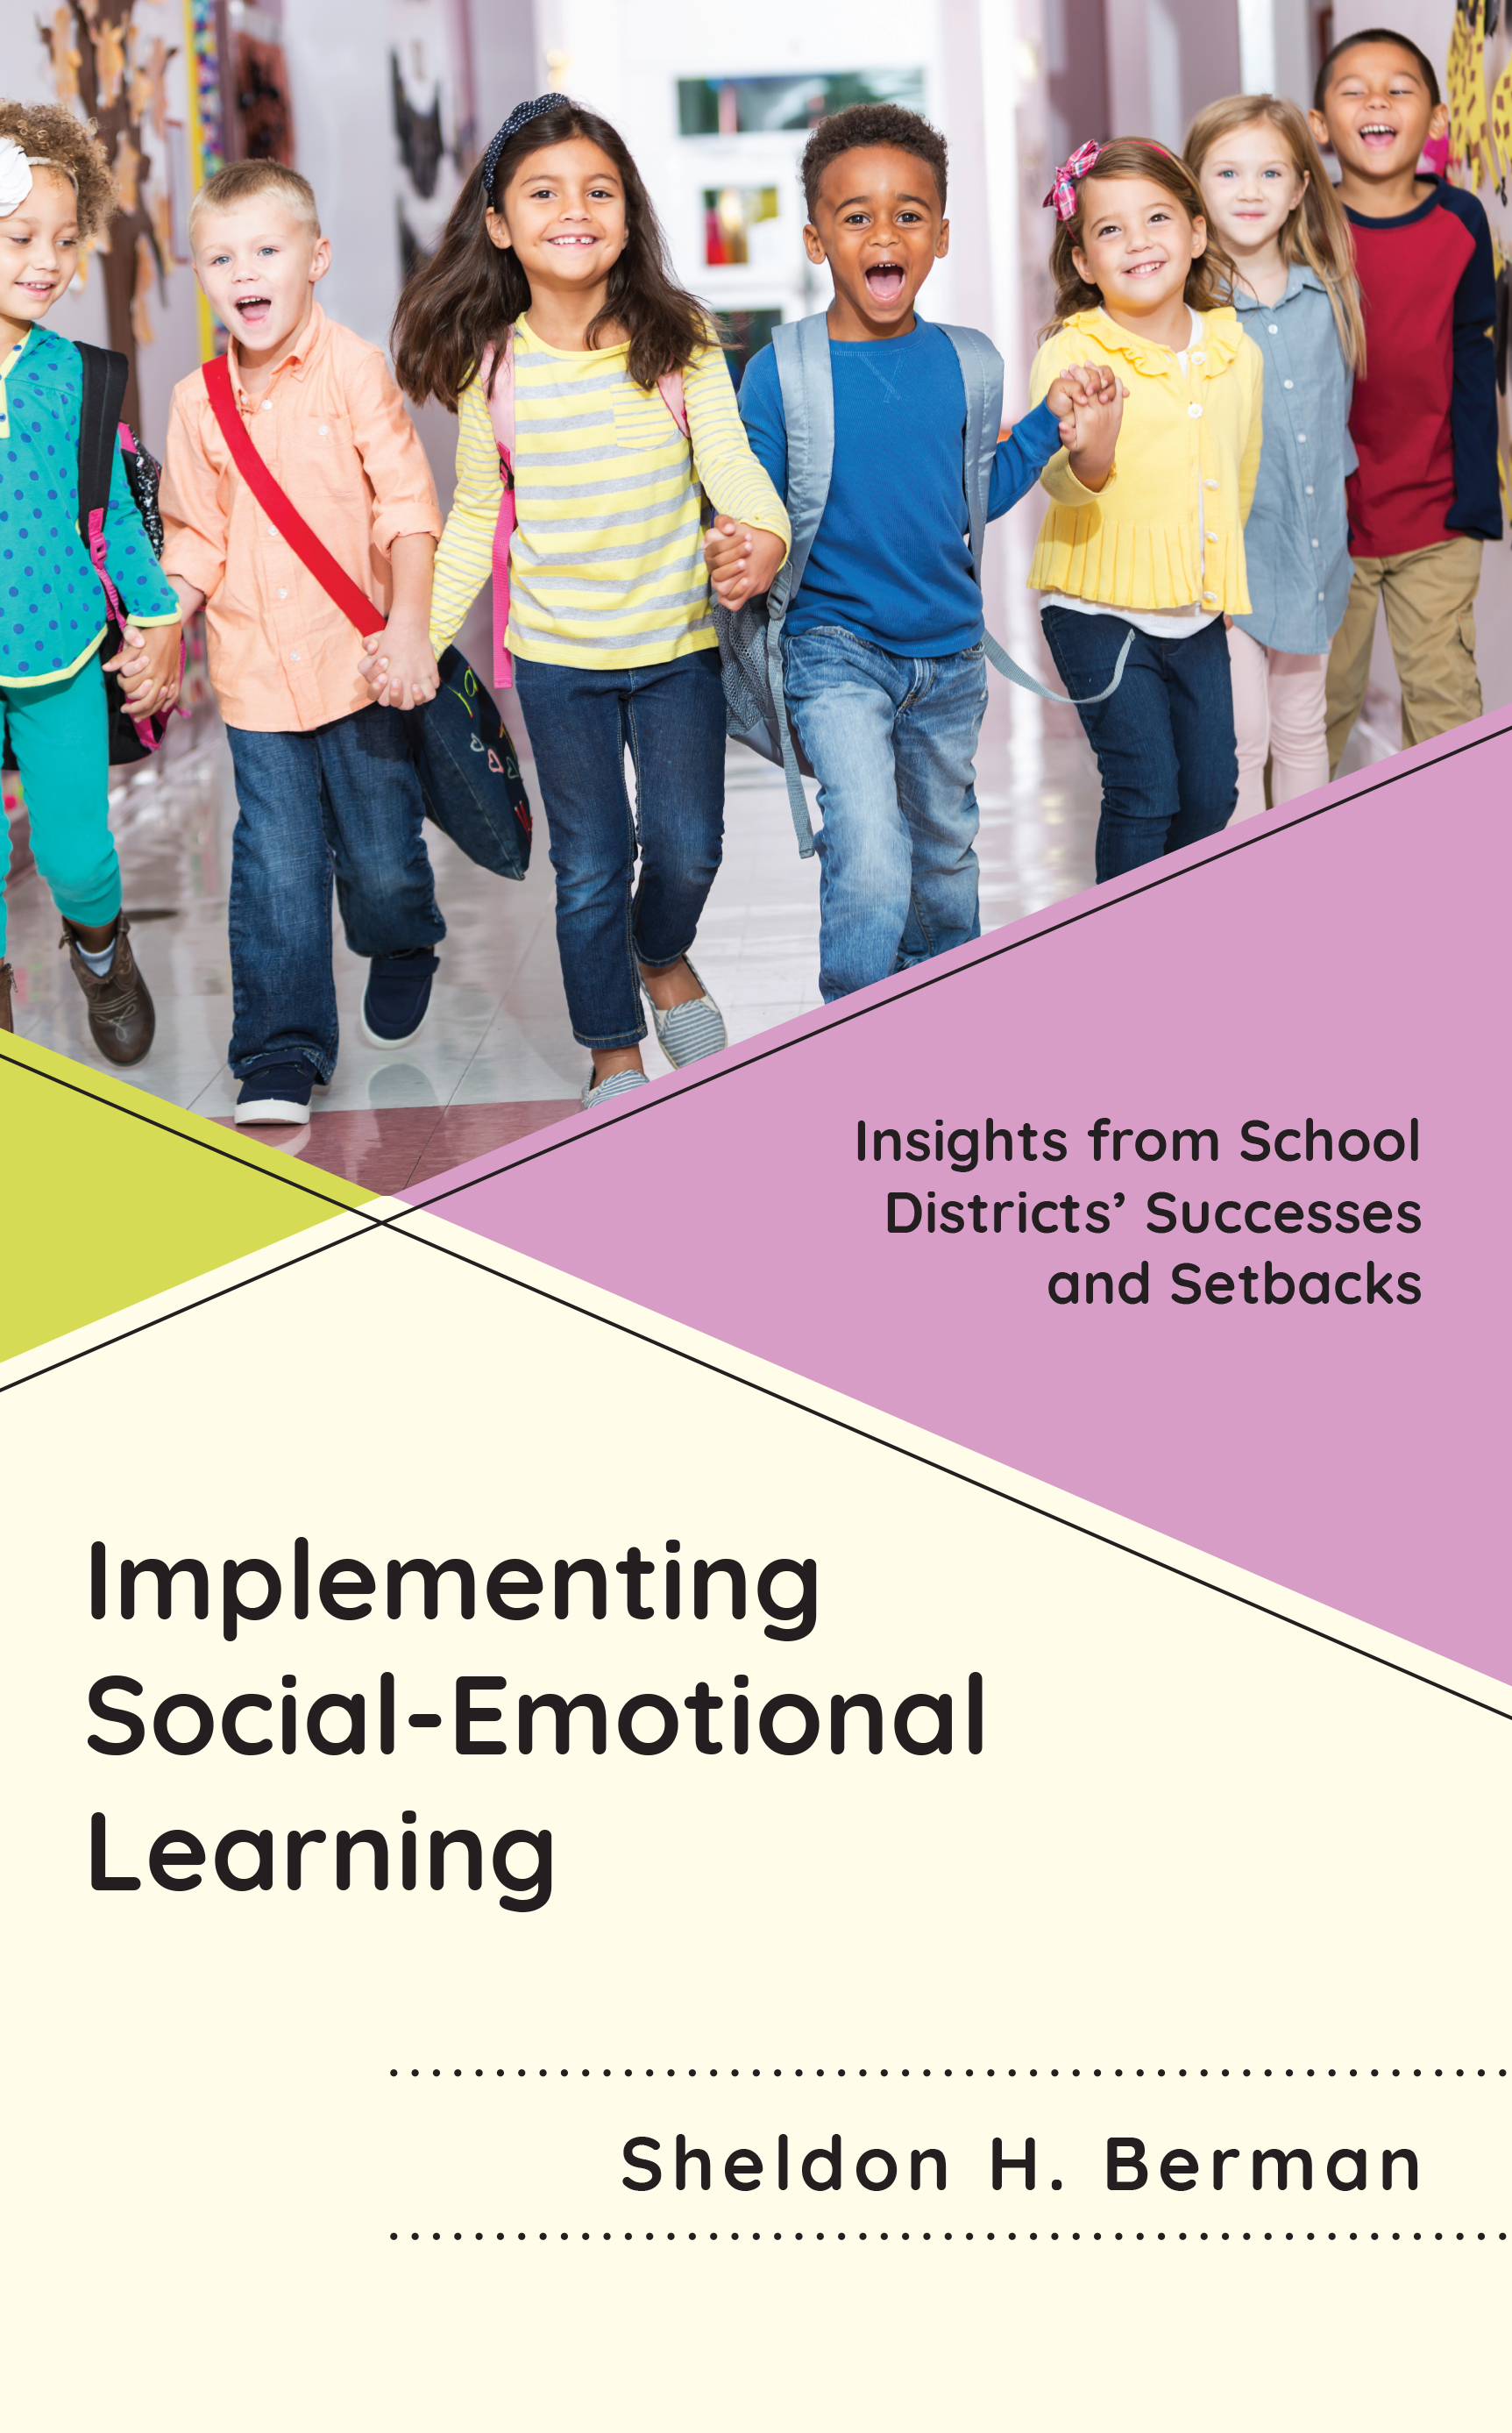 Implementing Social-Emotional Learning: Insights from School Districts’ Successes and Setbacks